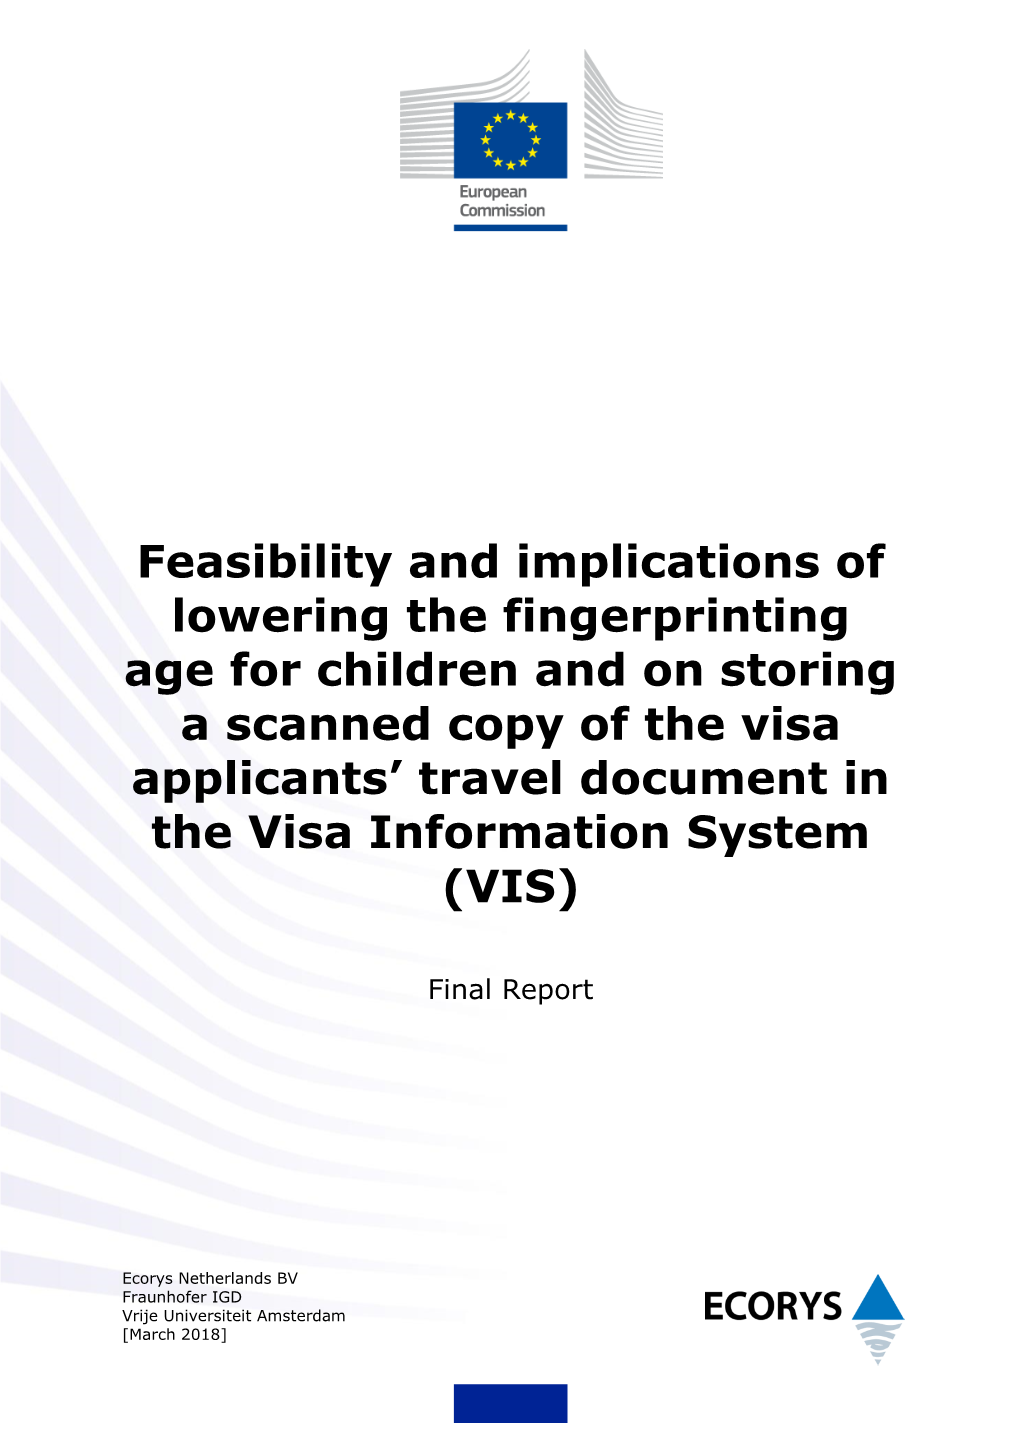 Feasibility and Implications of Lowering the Fingerprinting Age For